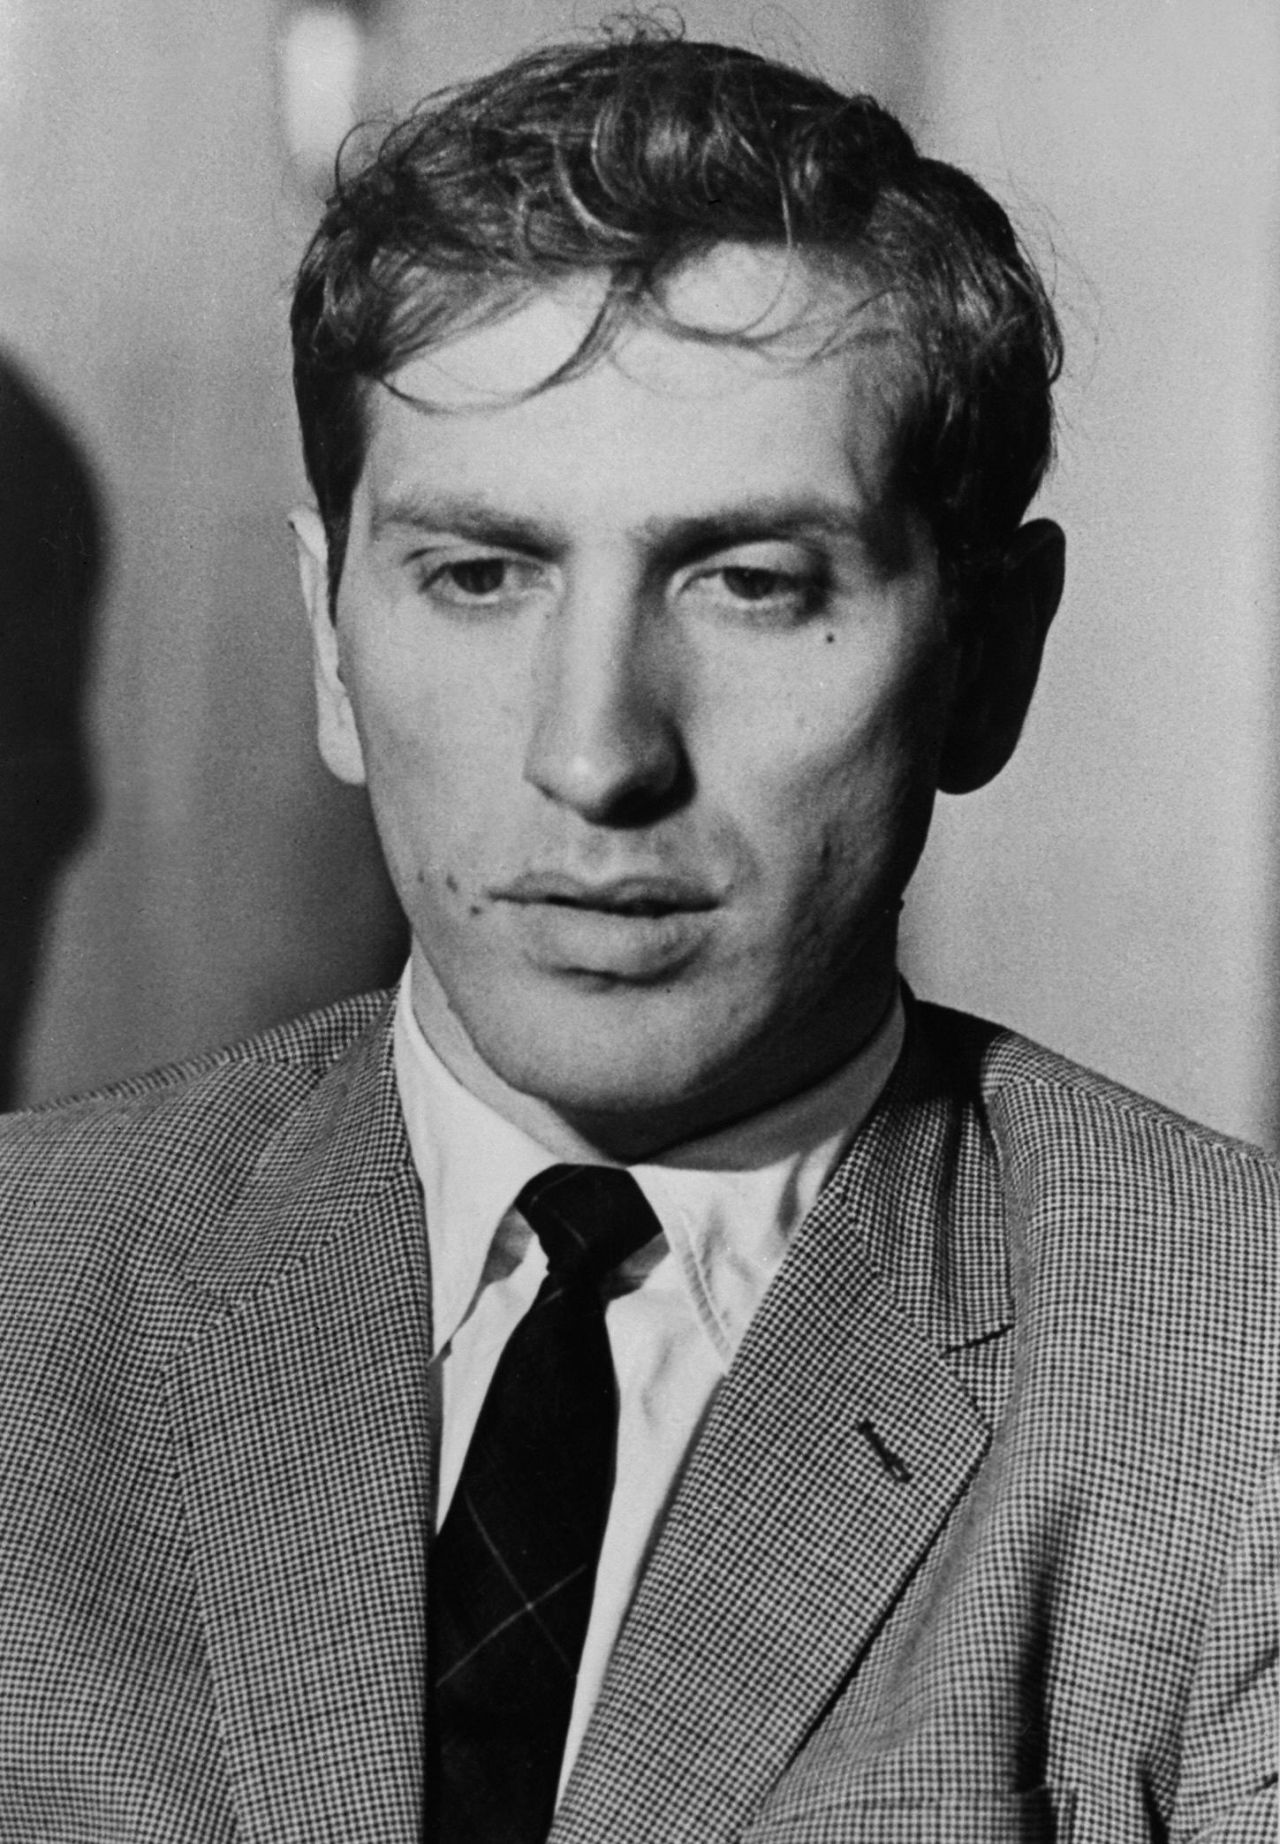 American chessplayer Bobby Fischer is considered one of the greatest of all time. His 1972 World Championship win against Boris Spassky has been dubbed "The Match of the Century." After the match, Fischer didn't play publicly for almost 20 years.